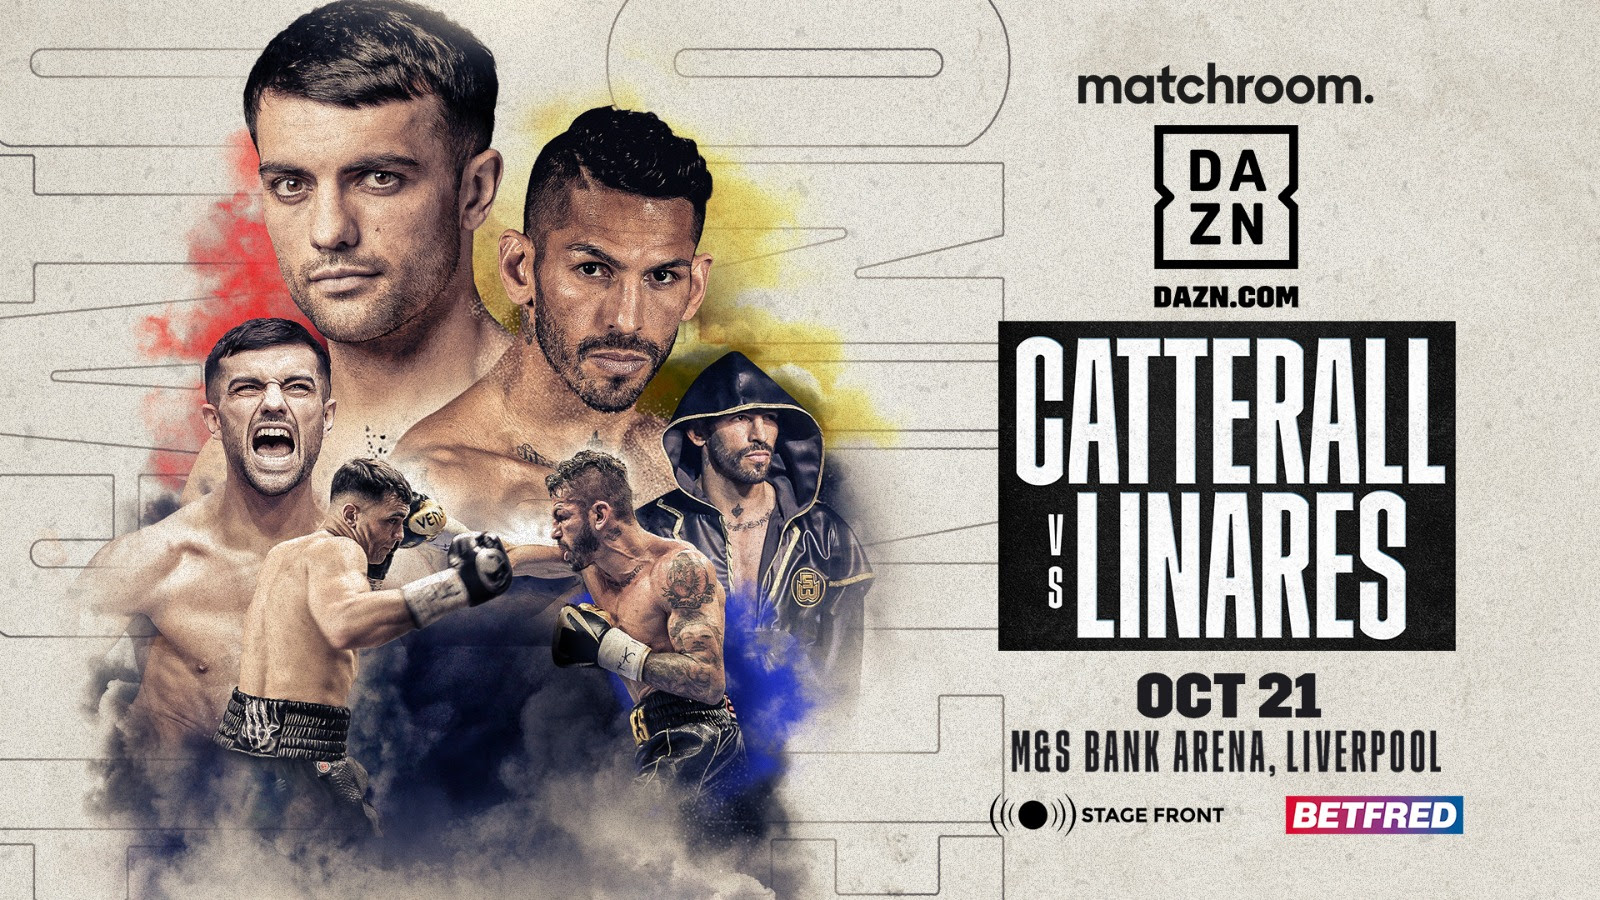 Jack Catterall faces multi-weight world champion Jorge Linares, October 21